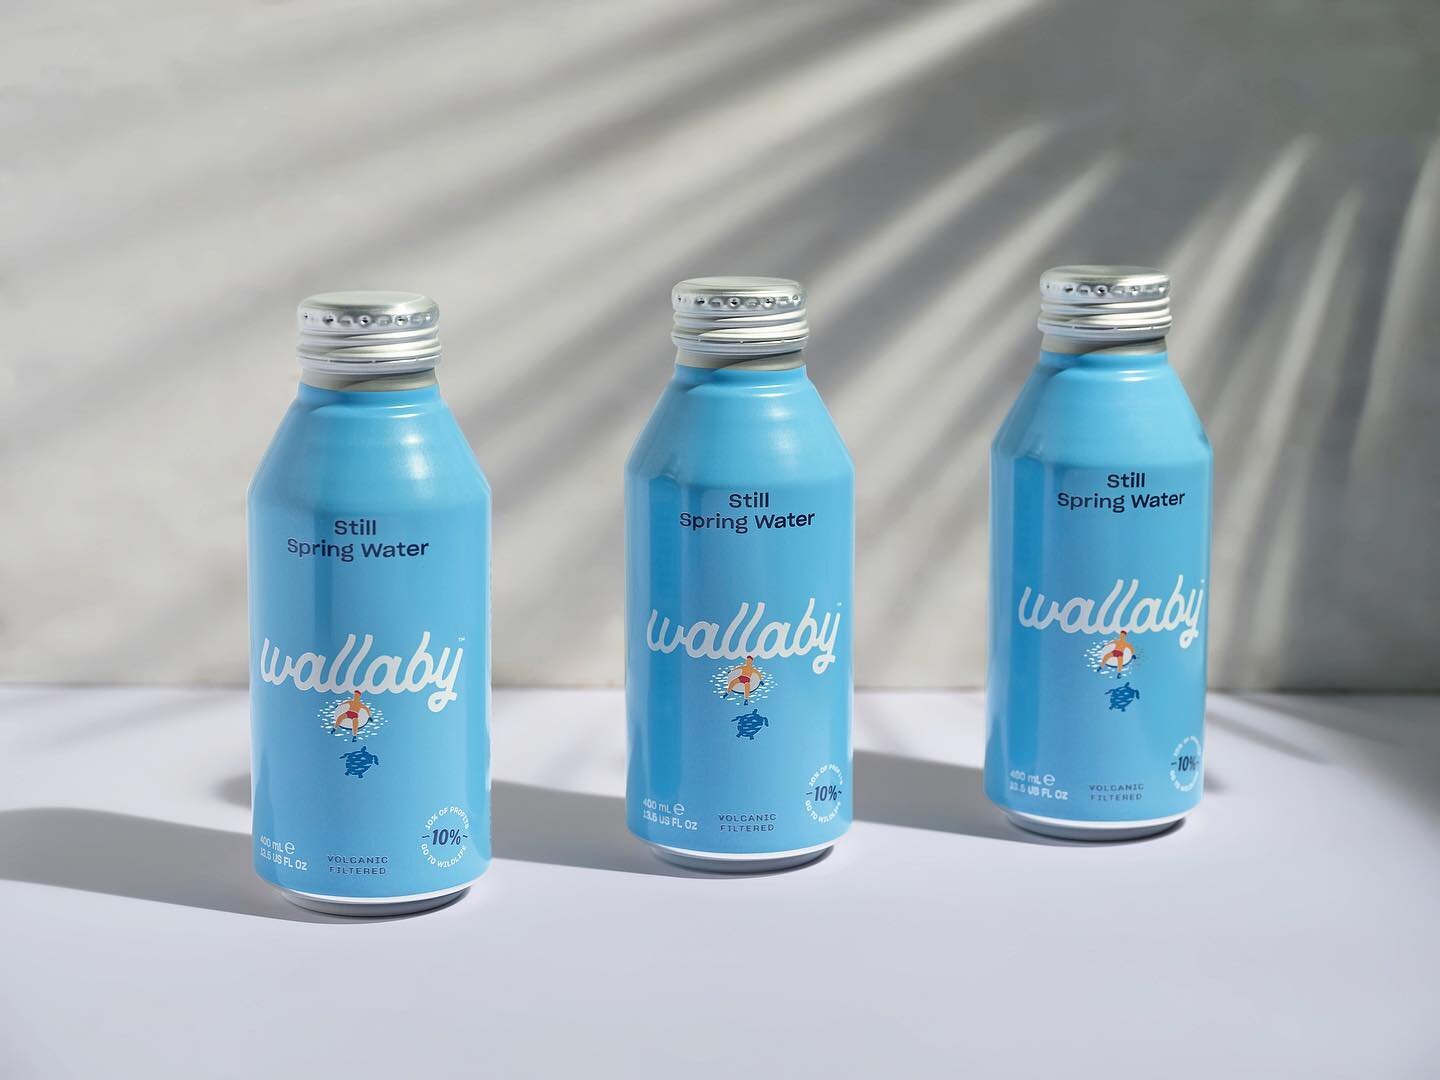 #triplethreat to problematic plastic bottles 🕶️

&bull; Highest average recycled content 
&bull; Infinitely recyclable
&bull; Now available in a resealable aluminium bottle

👋🏼 farewell plastic!